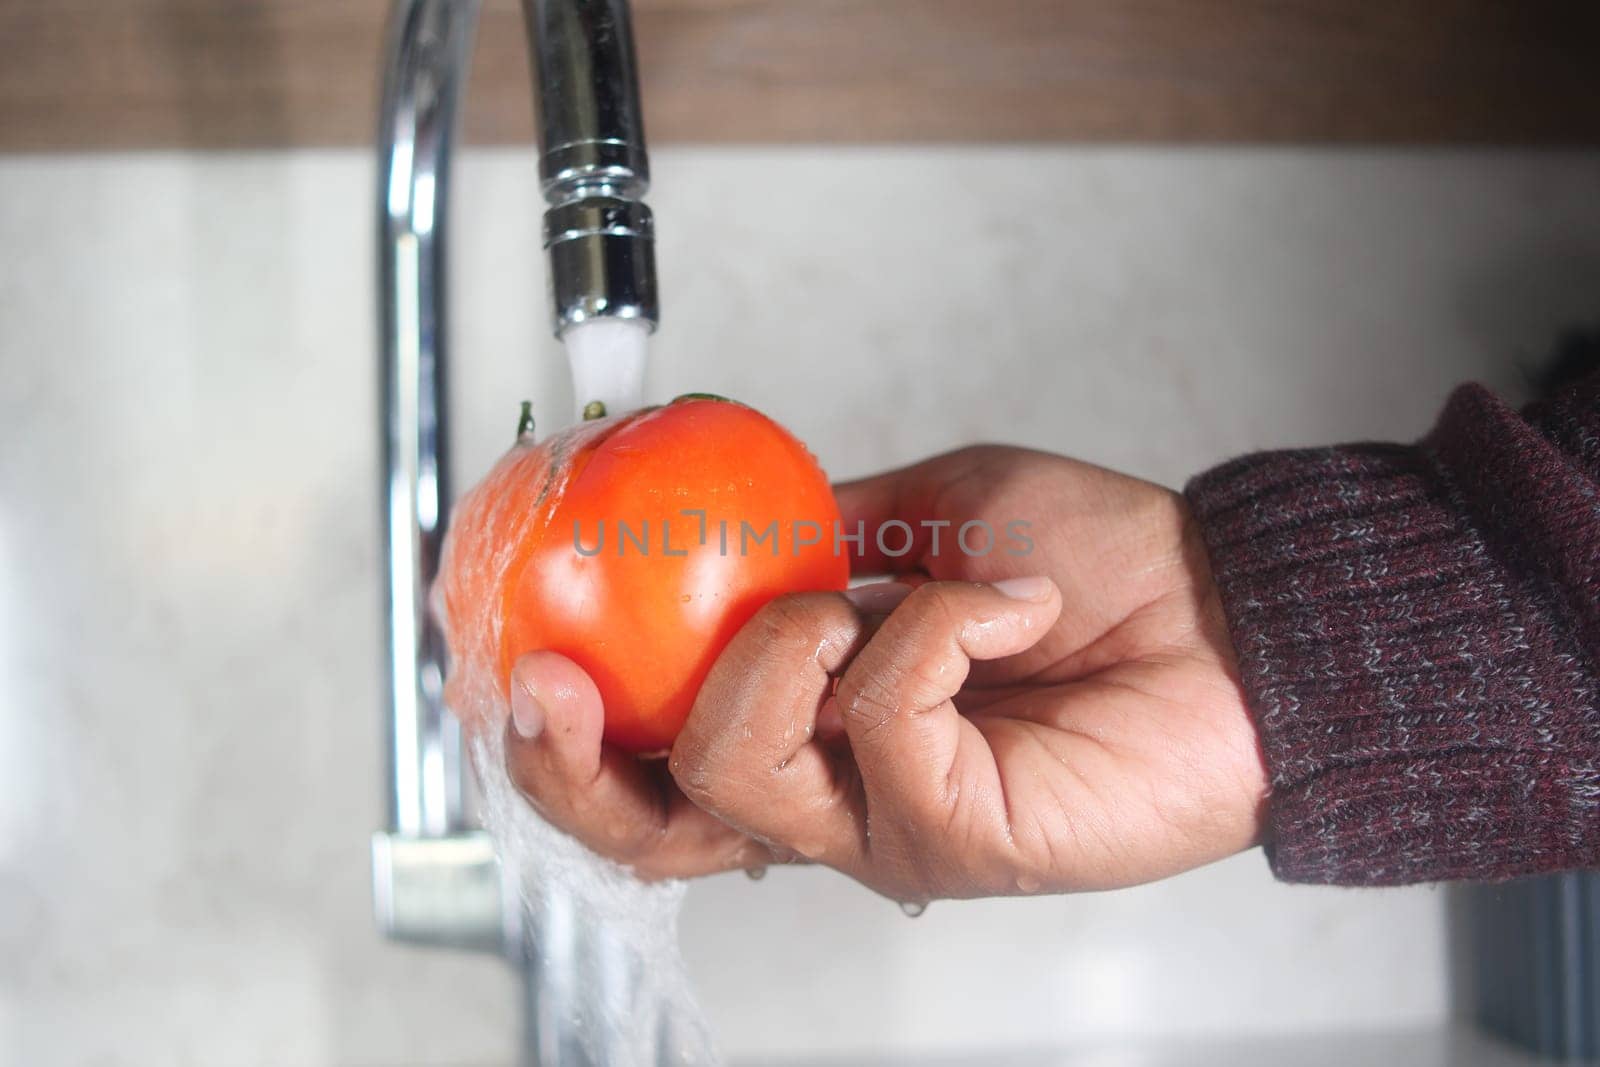 washing tomato with water sprinkling.